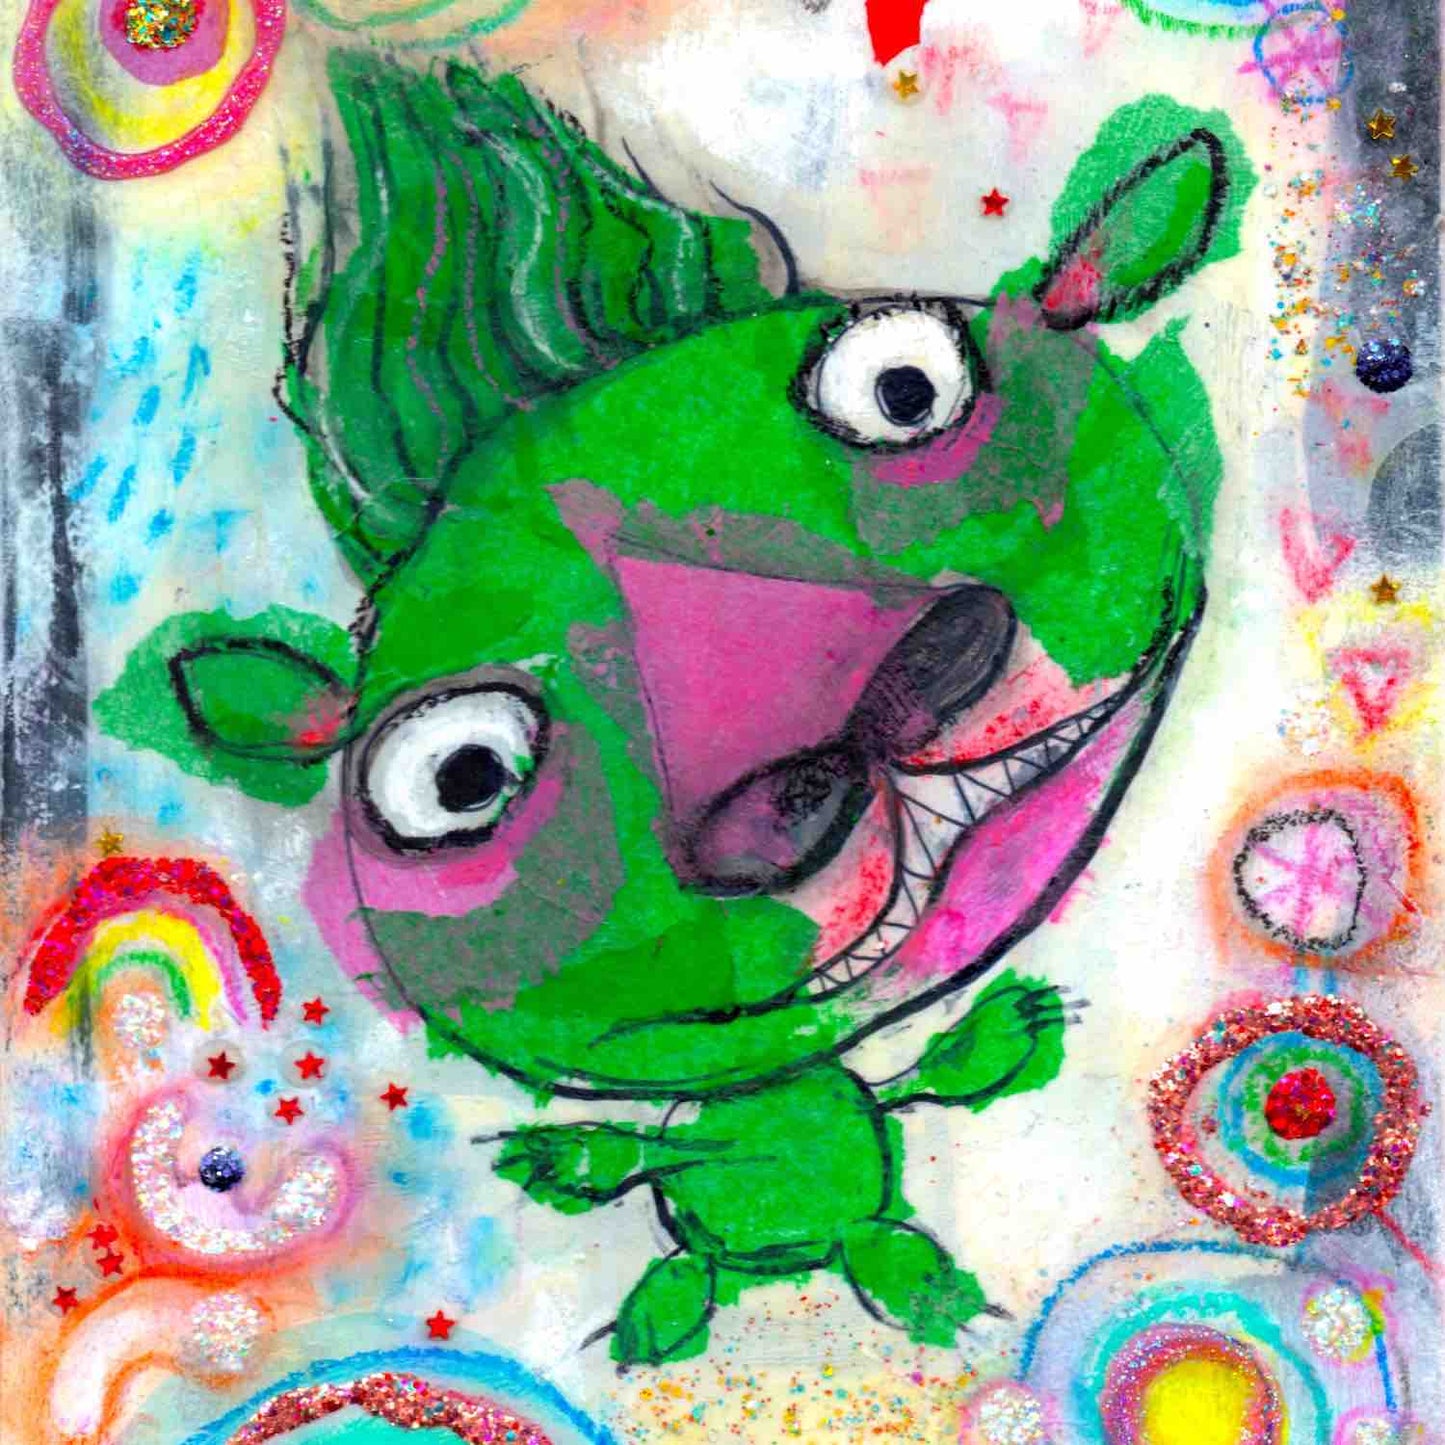 Detail of colorful happy fine art print of a green monster smiling on vibrant background. Art poster by Alex Mitchell.